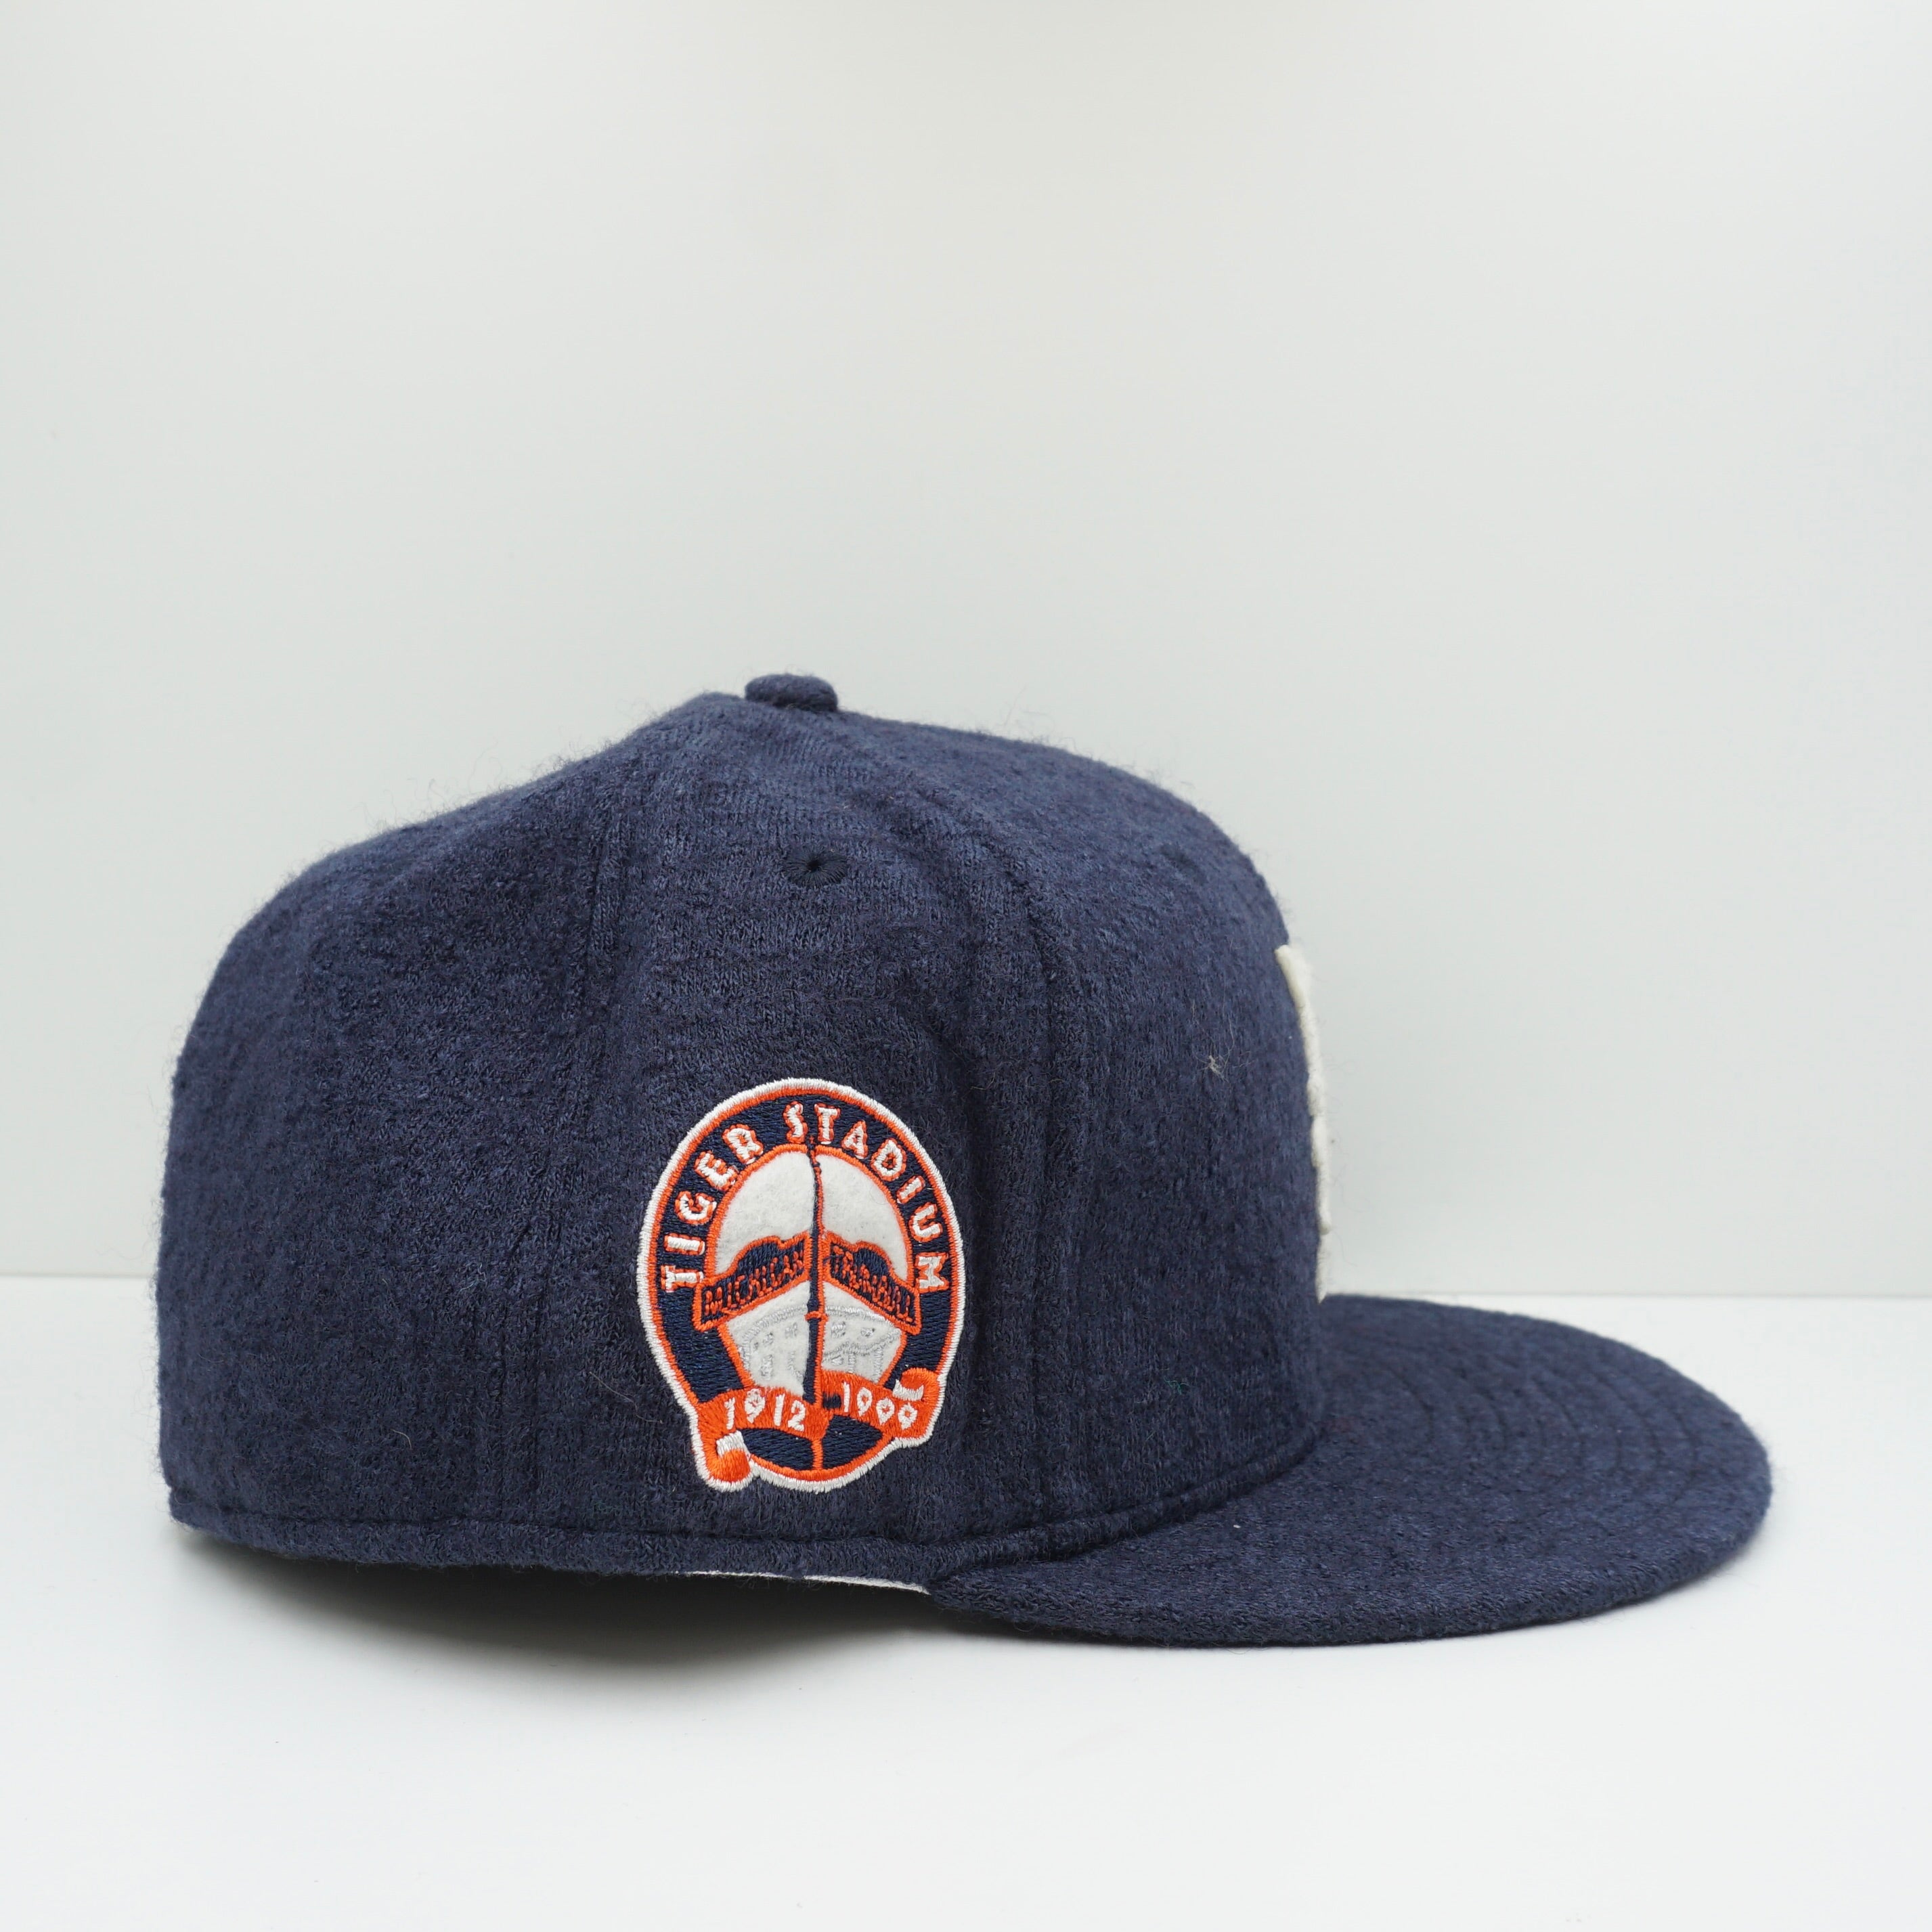 New Era Cooperstown Detroit Tigers Navy Fitted Cap